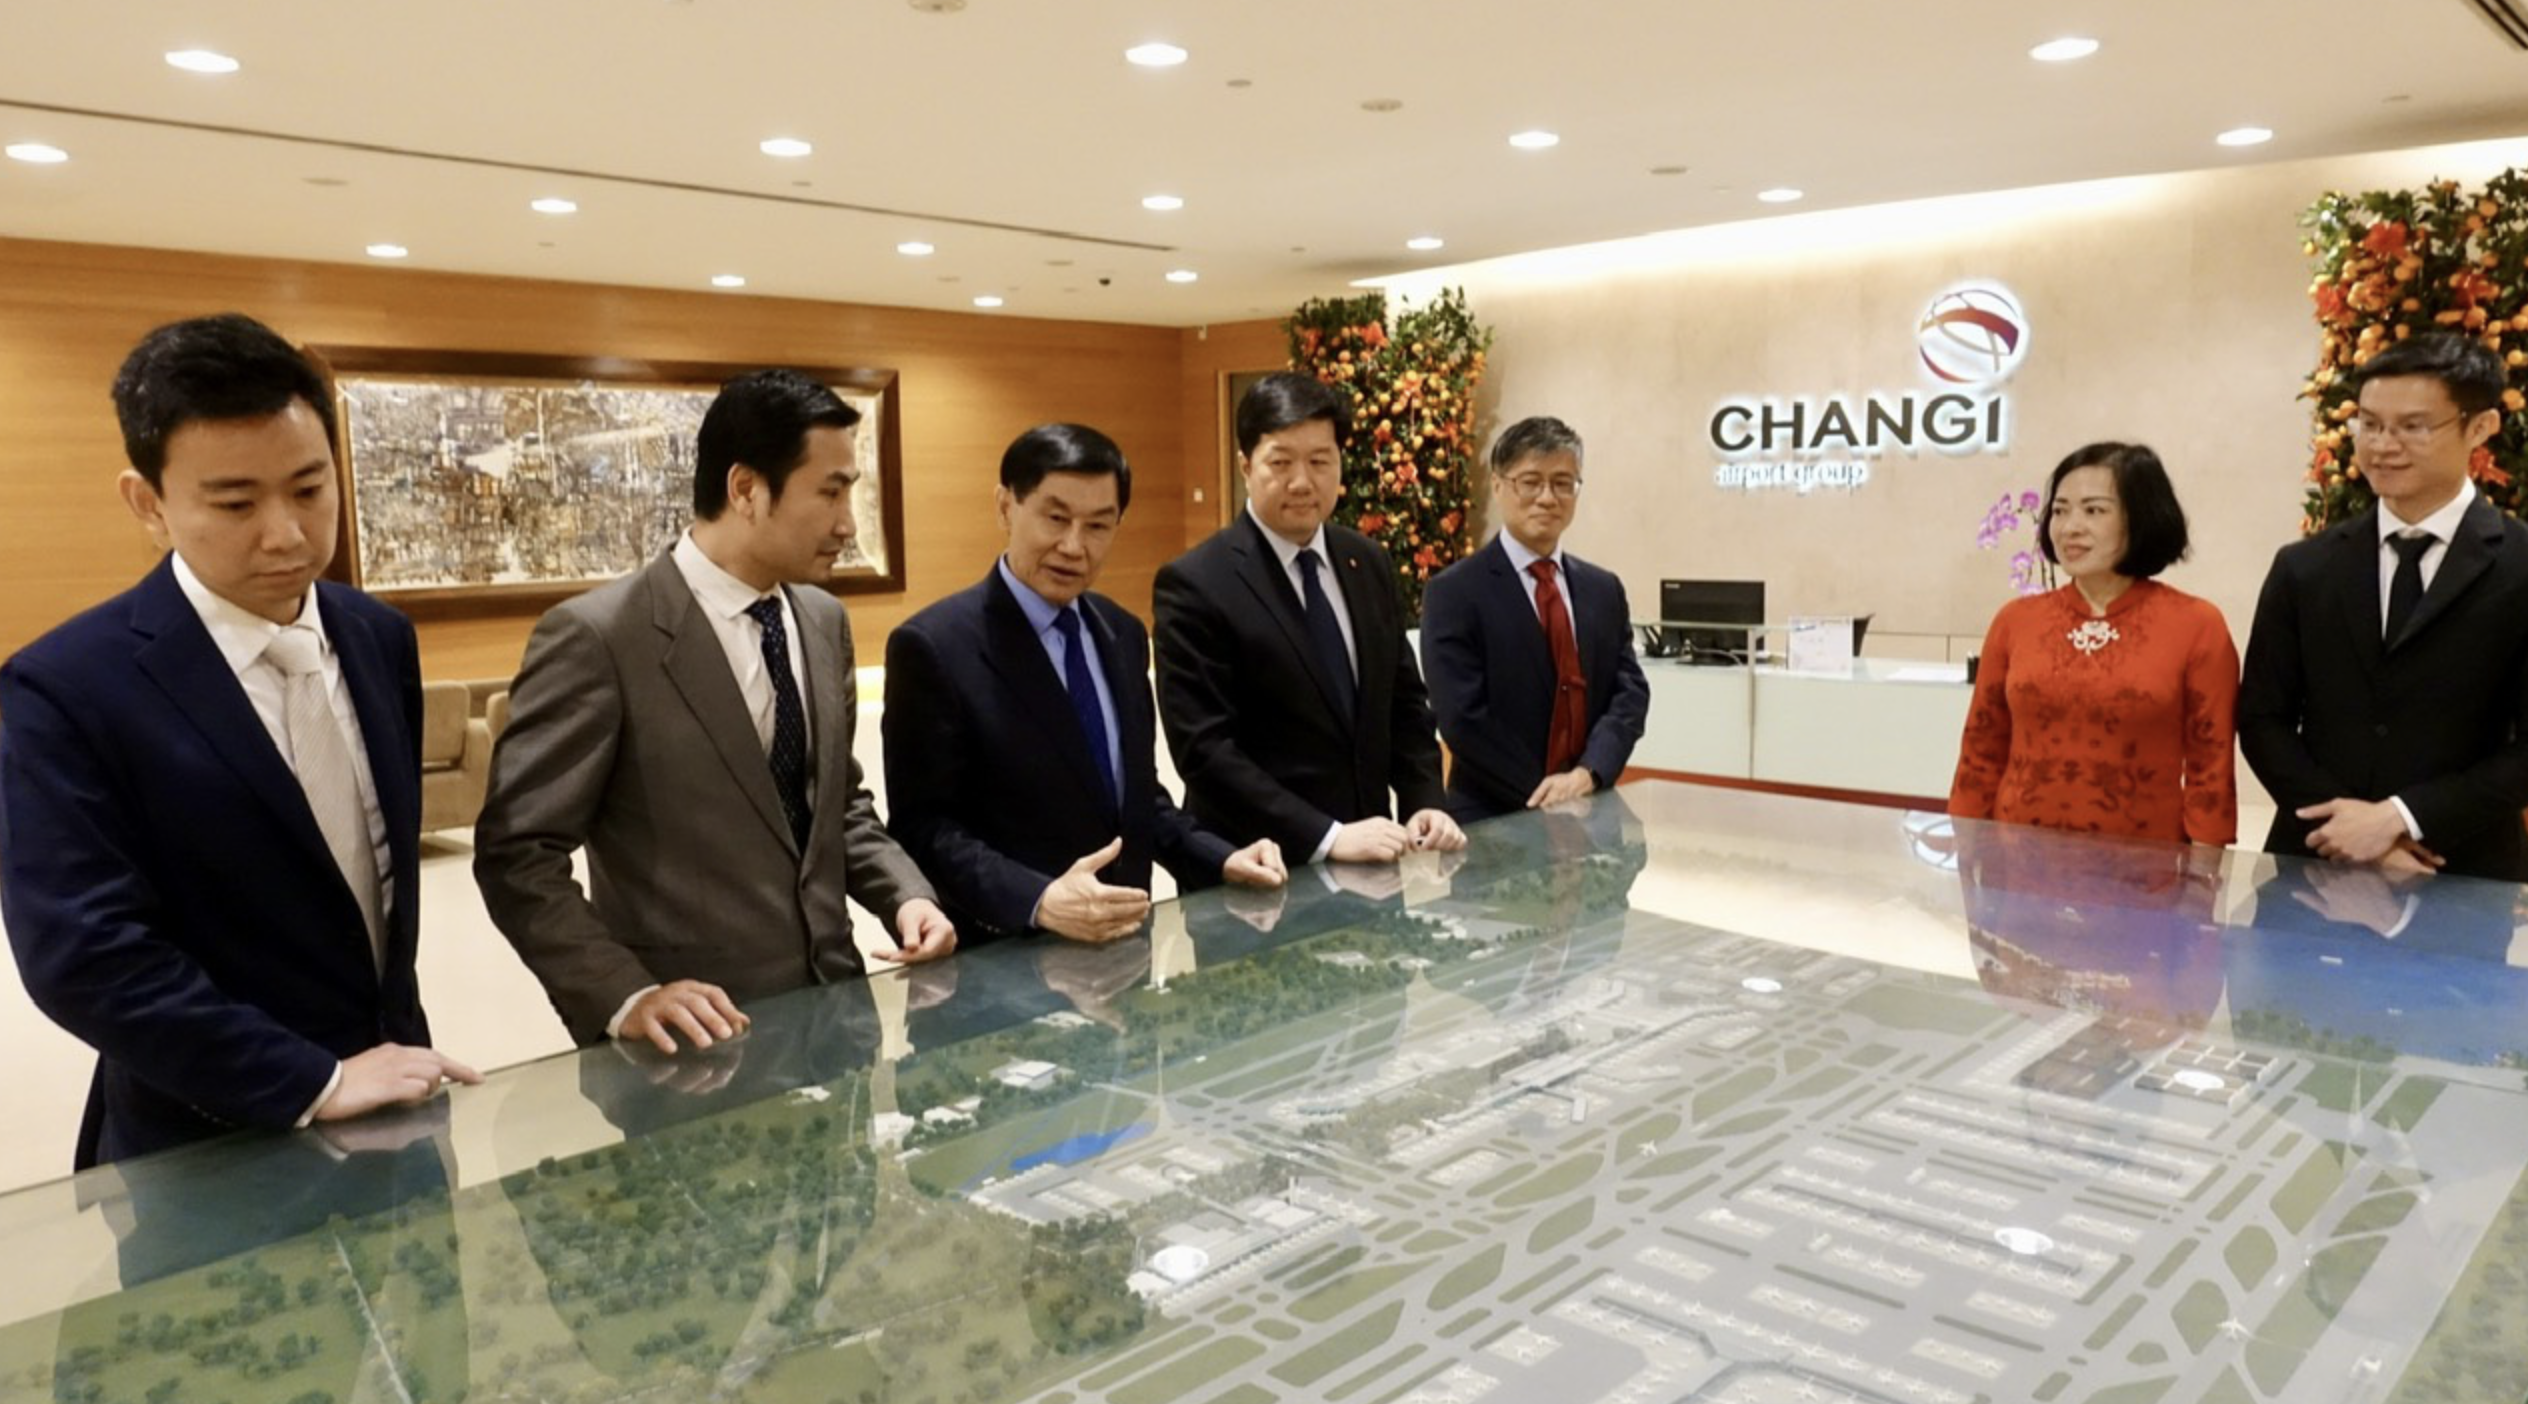 Johnathan Hanh Nguyen (L, third), investor of Cam Ranh International Airport in Khanh Hoa Province, south-central Vietnam, discusses the operation model at Changi Airport in Singapore with some partners. Photo: C.R. / Tuoi Tre